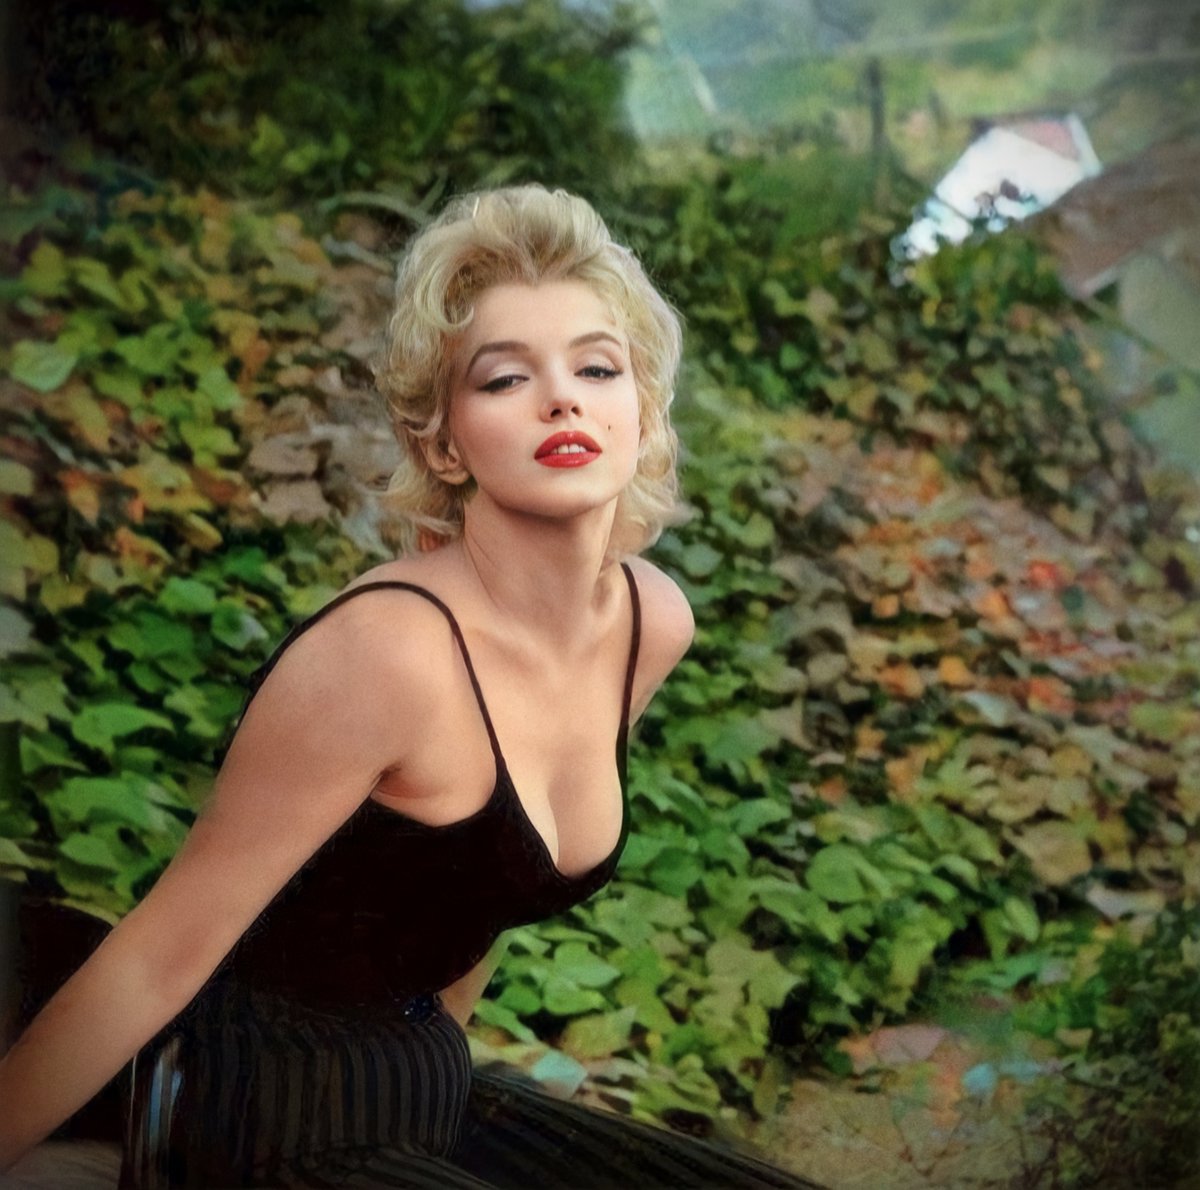 Ethereal Marilyn, captured by the lens of Gordon Parks, 1956.........